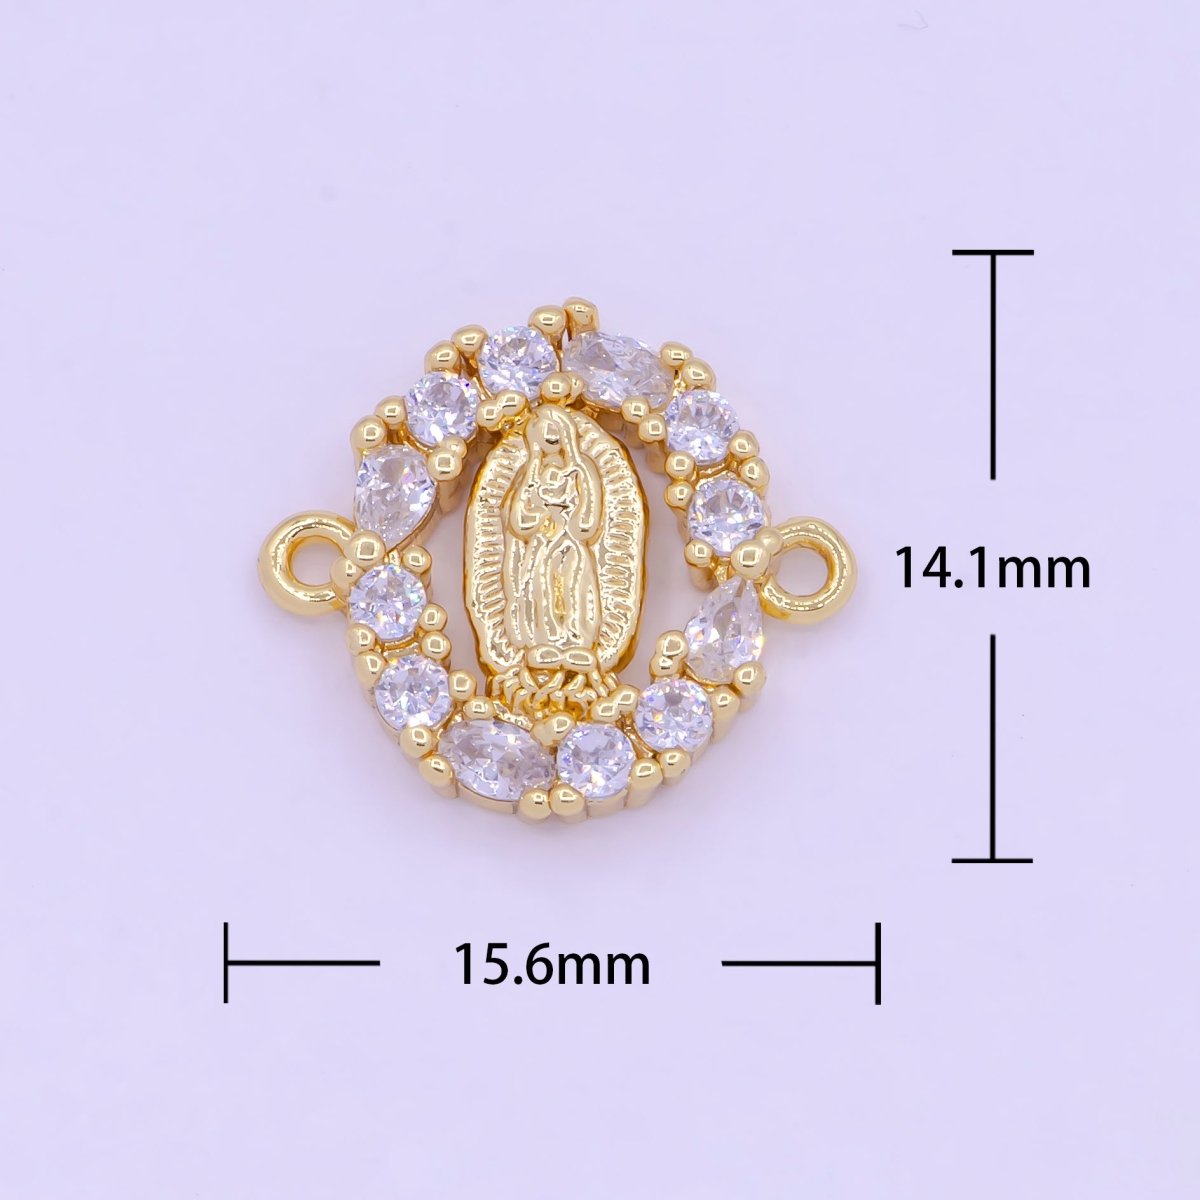 Gold Virgin Mary Connectors, Lady Guadalupe Link Charm Connector, Medallion Religious Jewelry Bracelet G-469 - DLUXCA